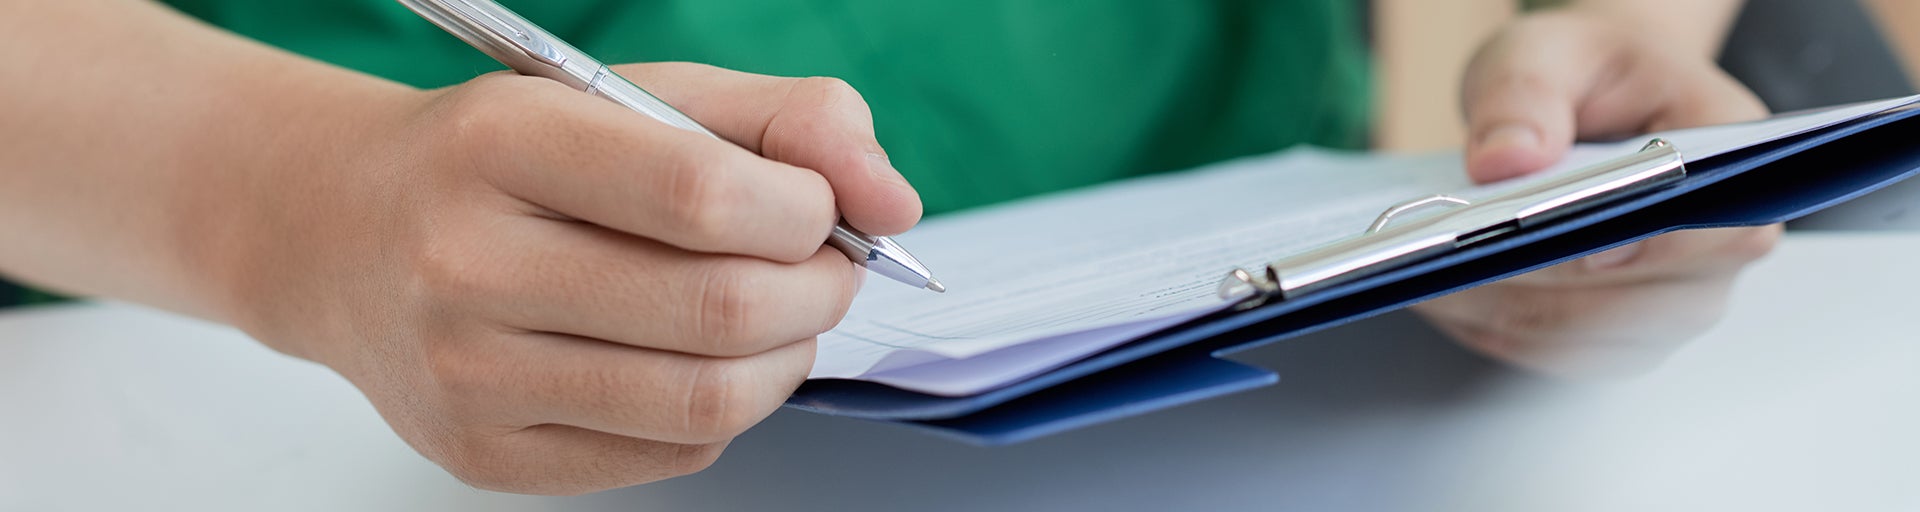 Person in green shirt holding silver pen and clipboard